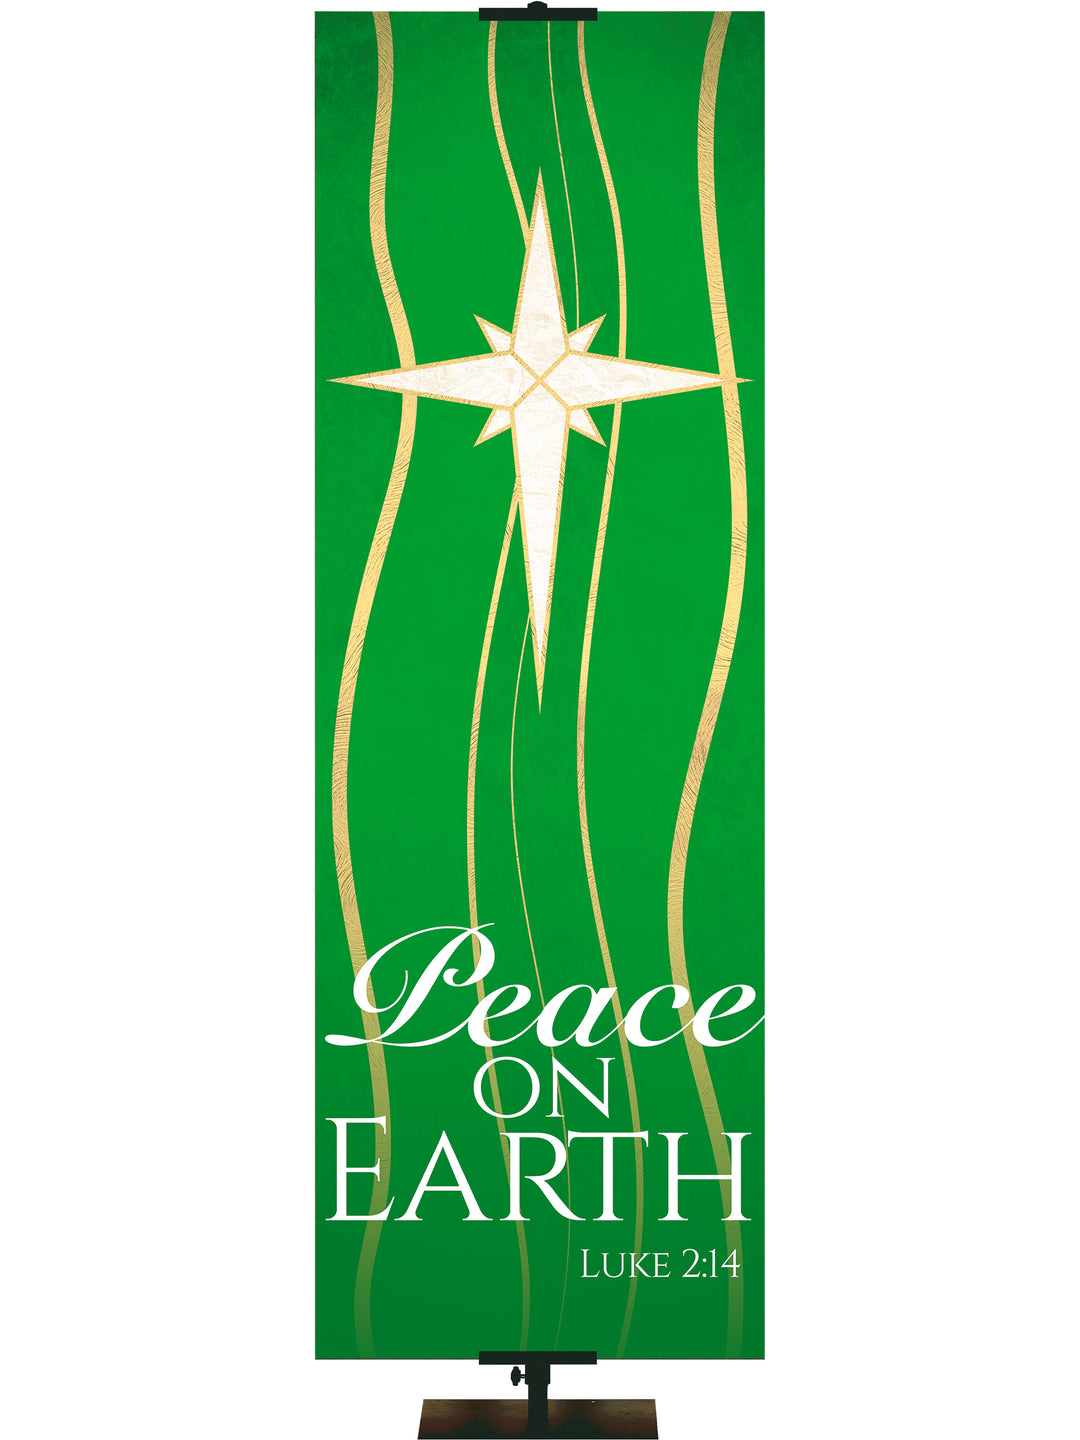 Experiencing God Symbols and Phrases Star, Peace on Earth - Liturgical Banners - PraiseBanners